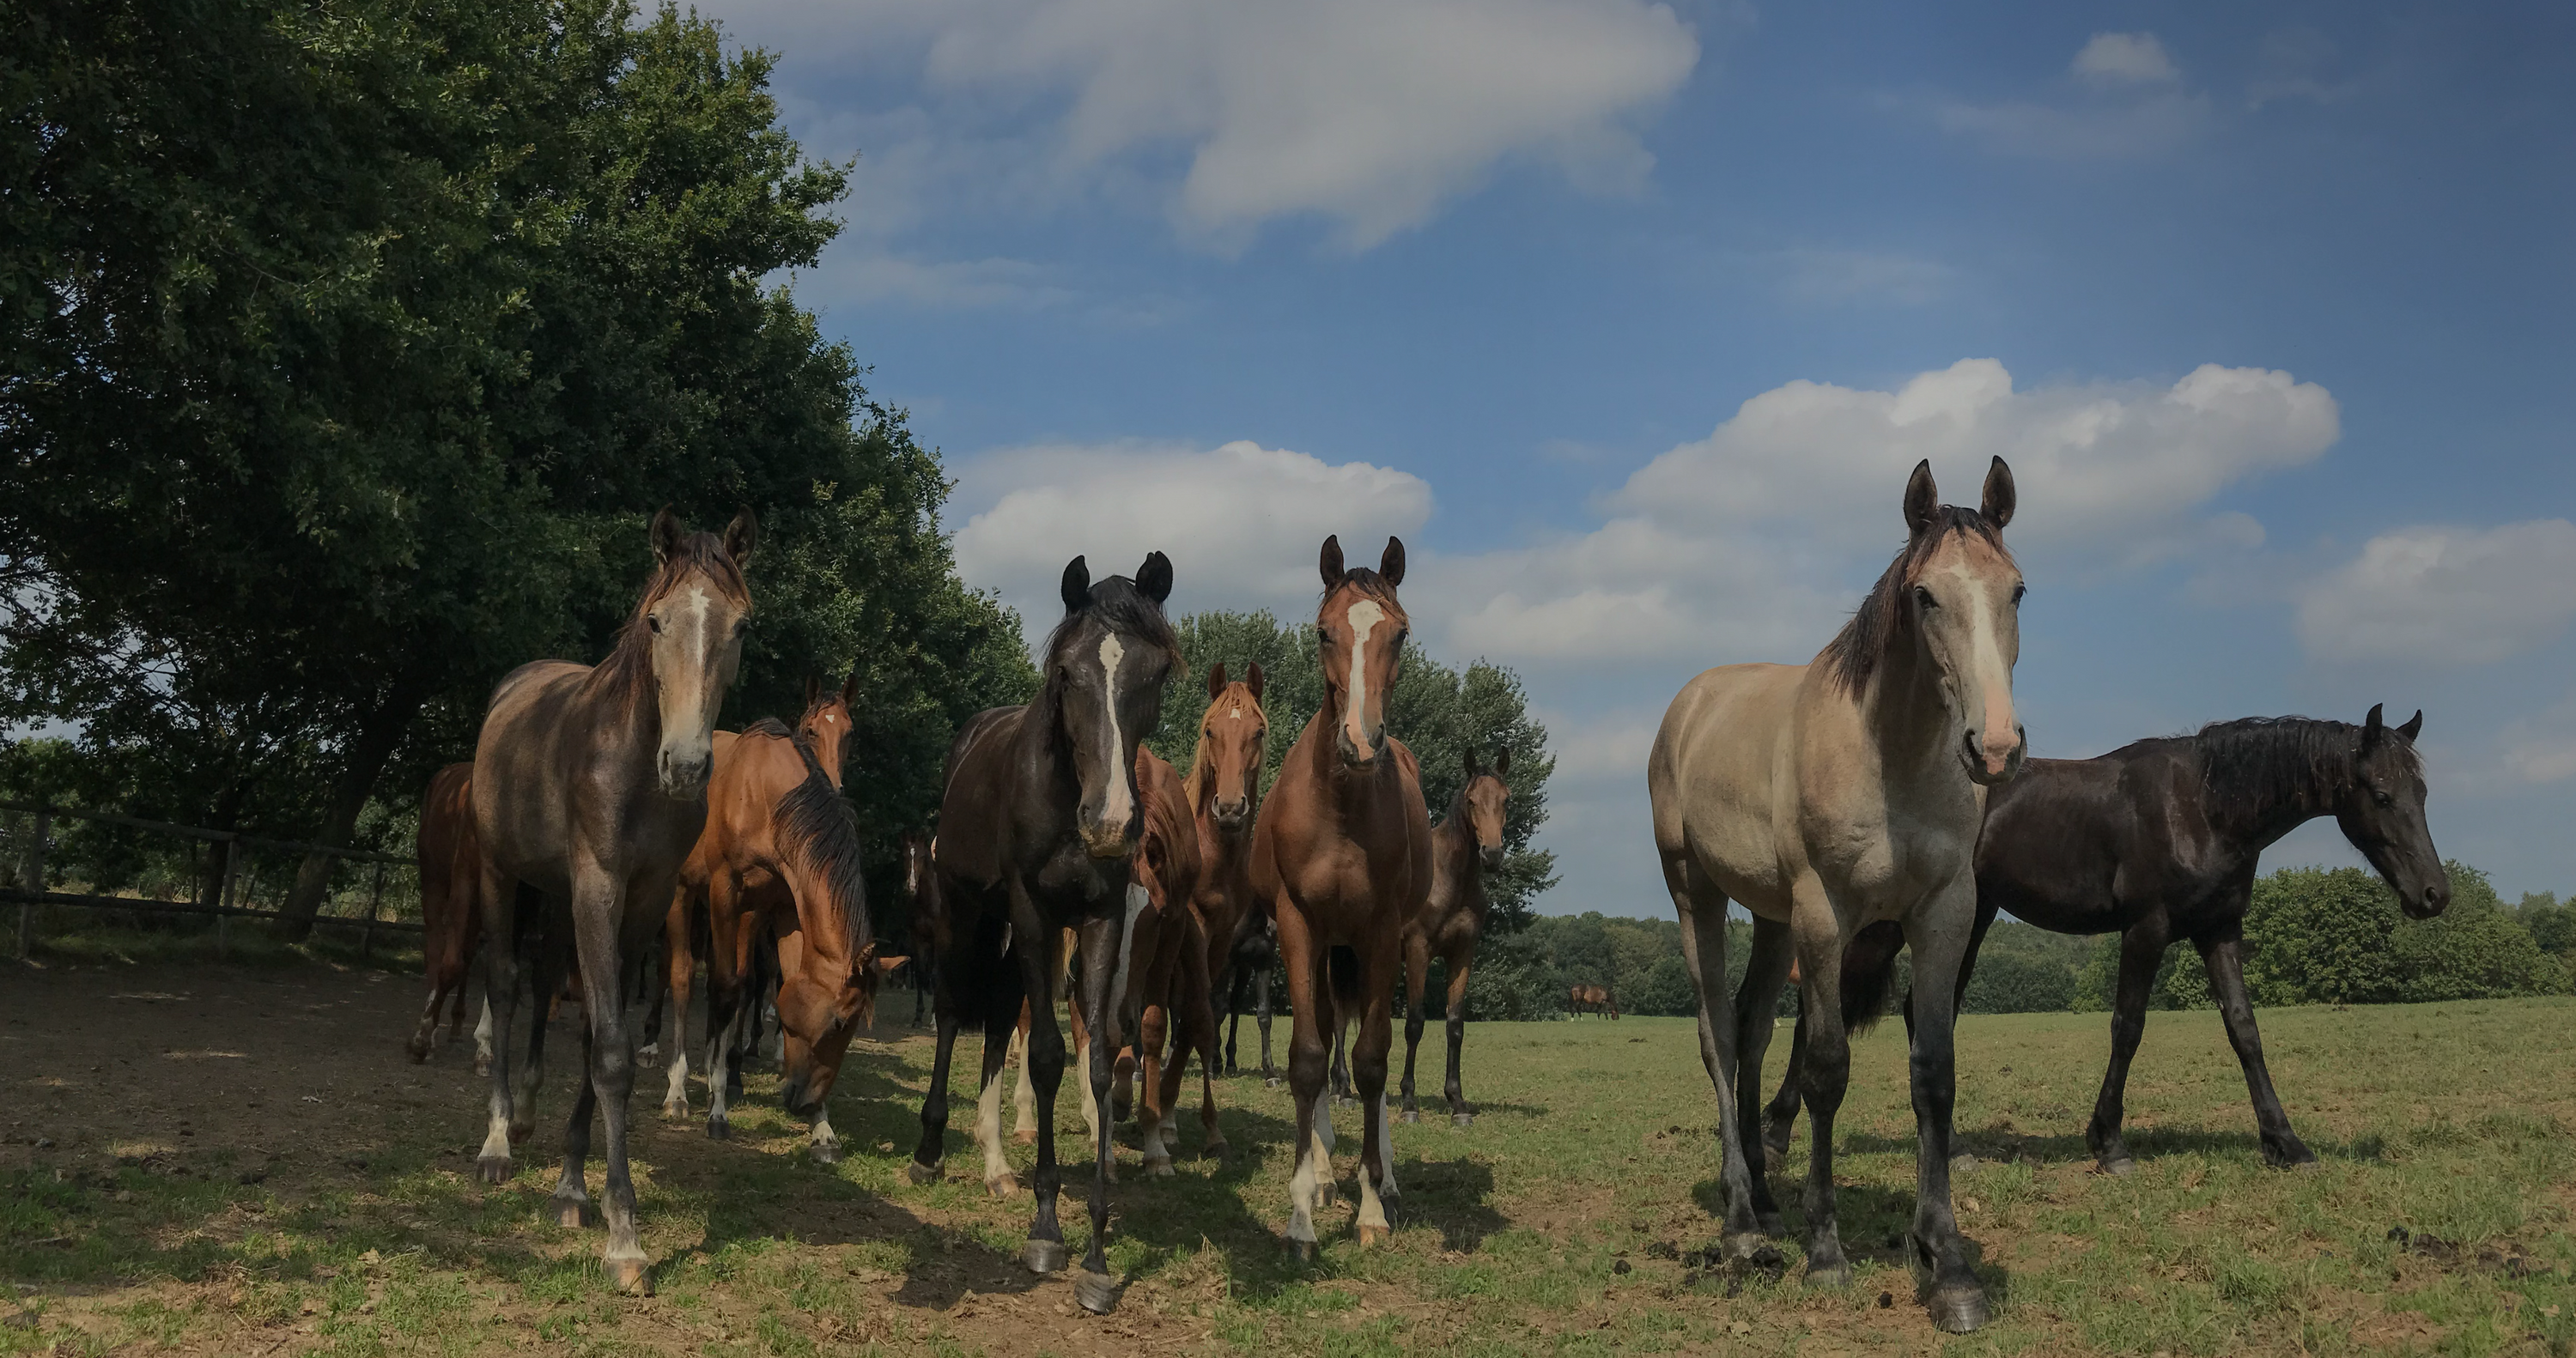 herd of horses stand in green field with horse flies